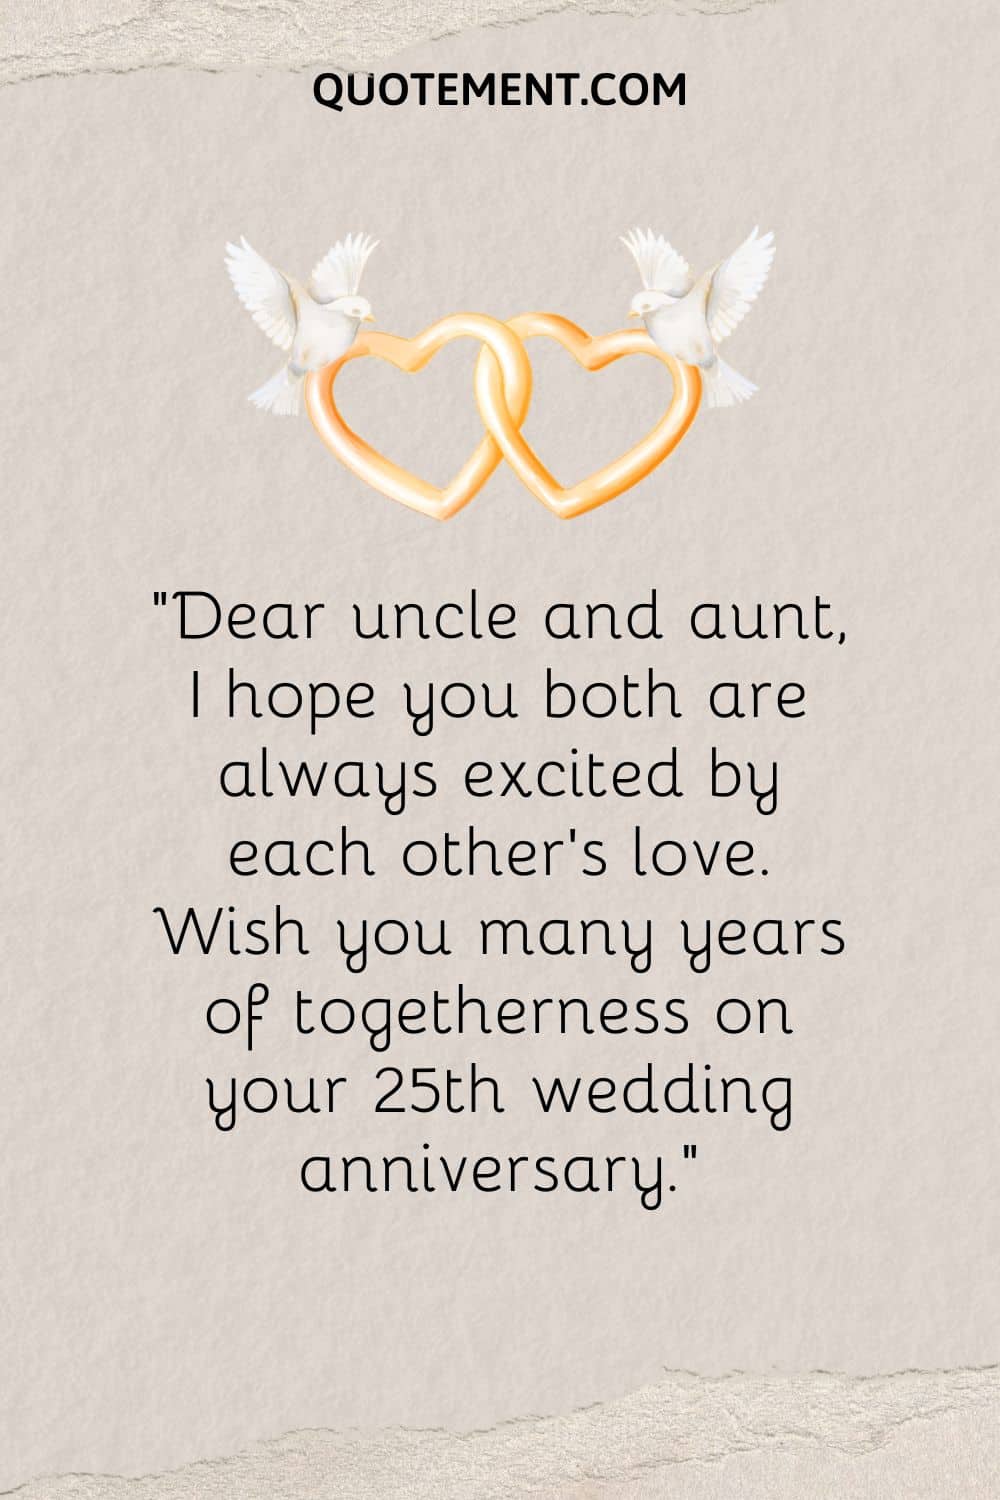 Dear uncle and aunt, I hope you both are always excited by each other’s love